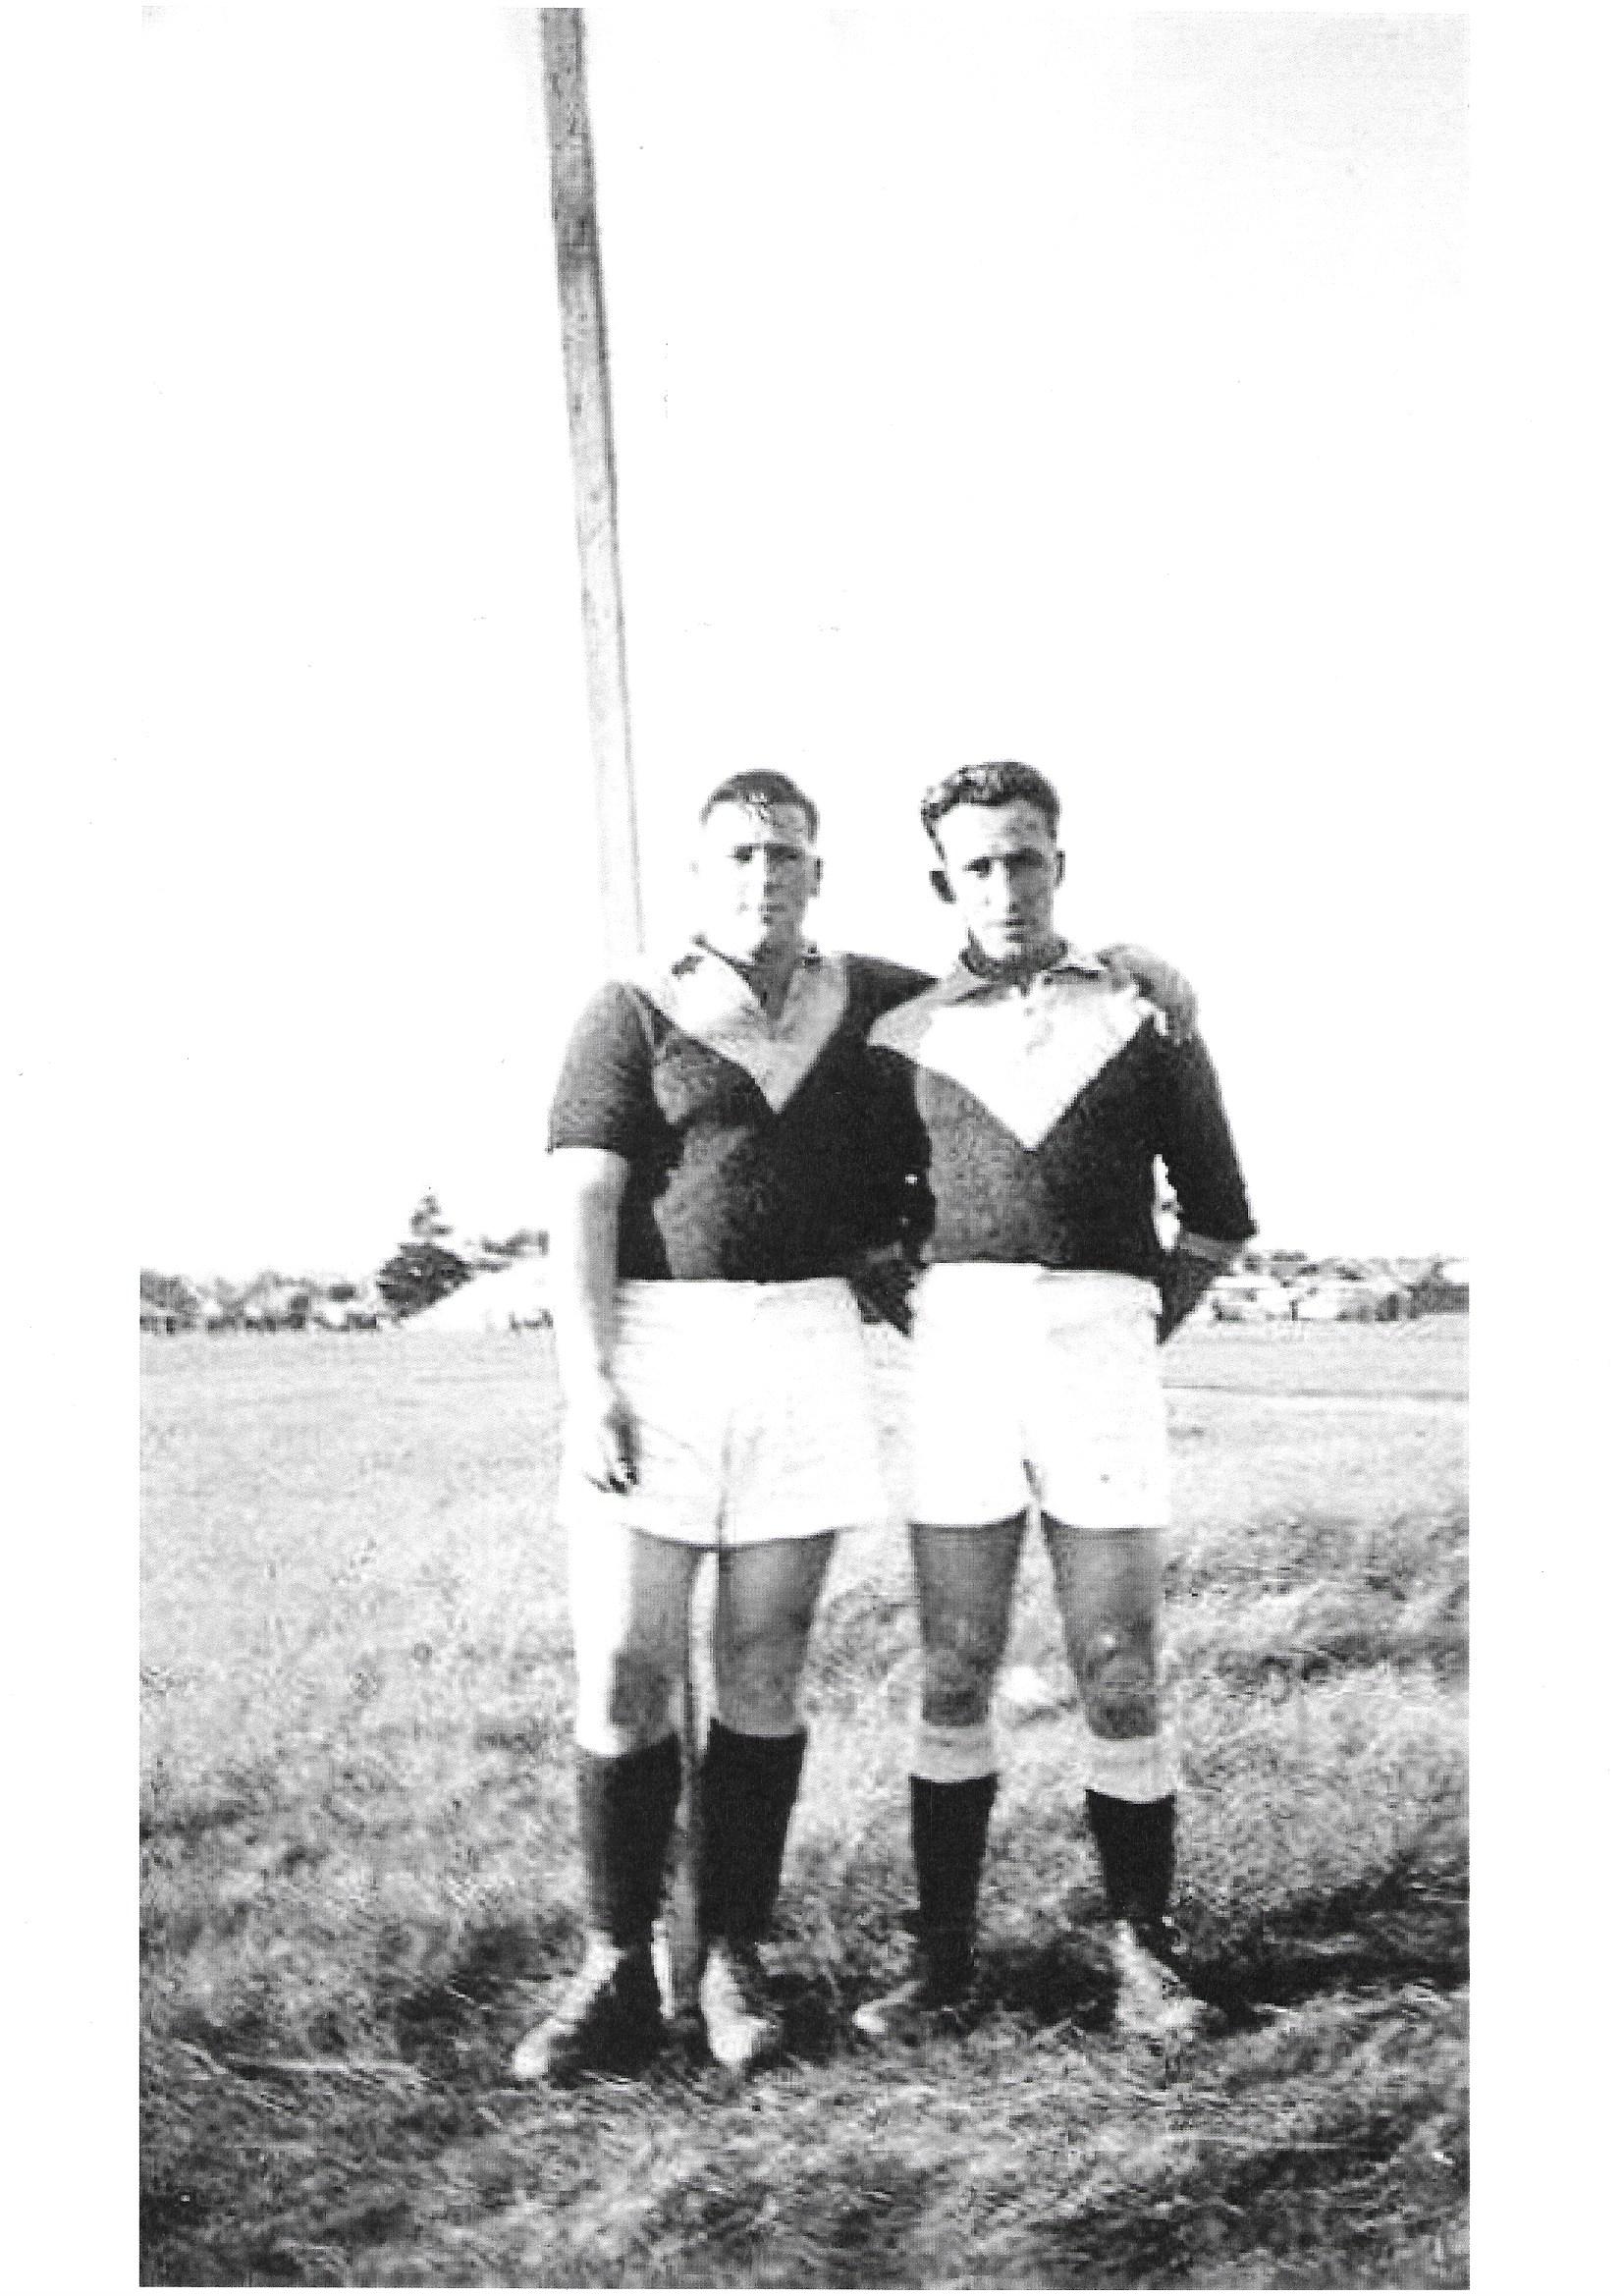 Image of  Ron Black and Laurie Bonuda, who played in 1946 and 1947 at Reservoir Football Club